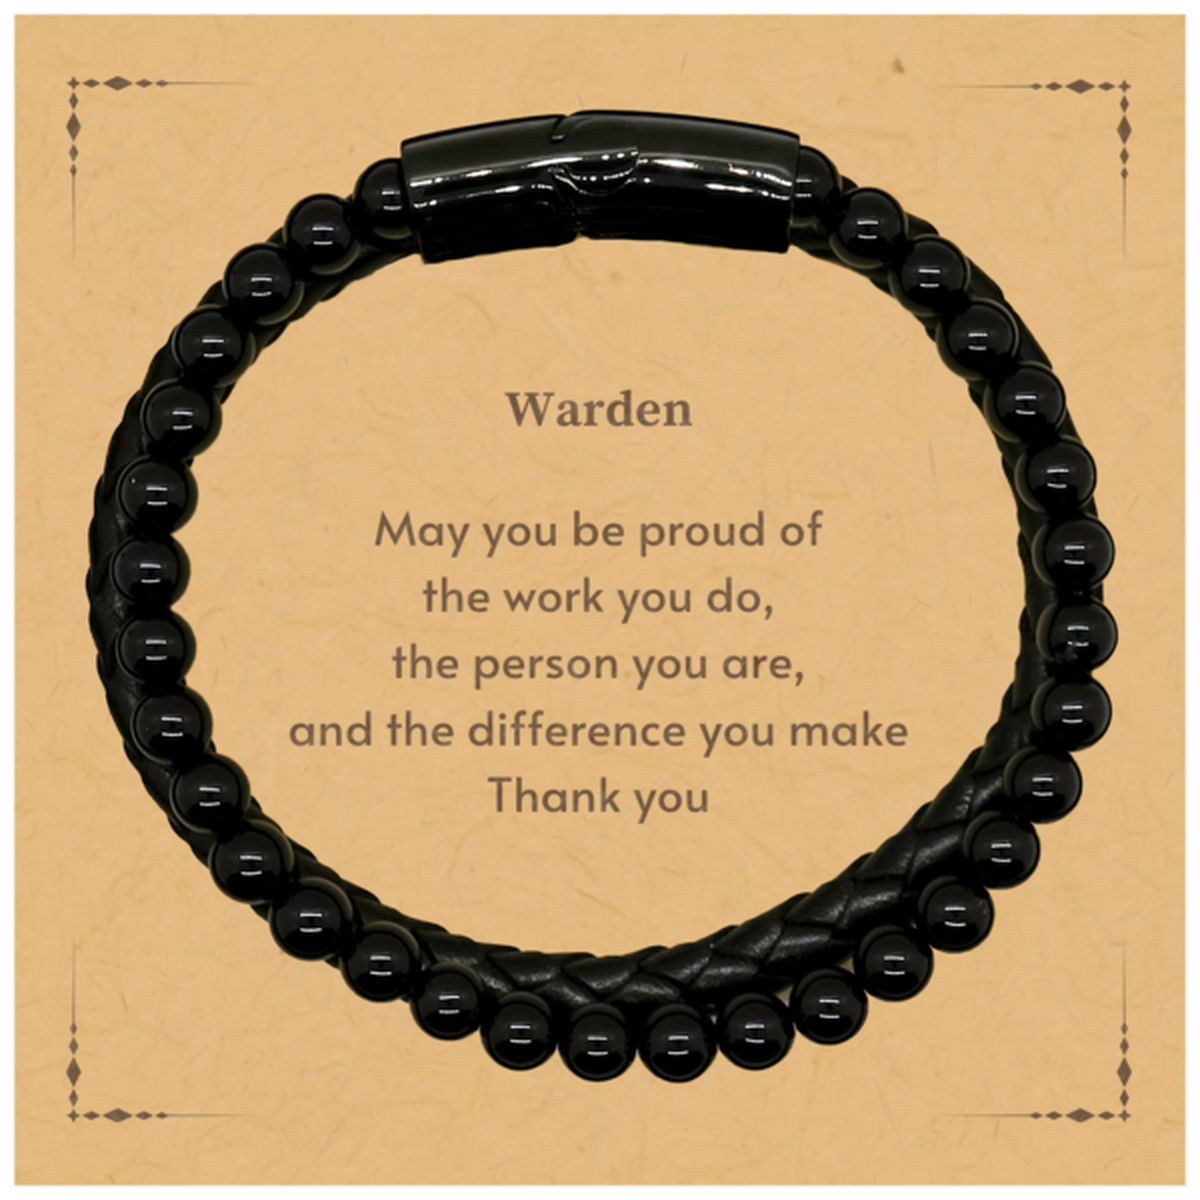 Heartwarming Stone Leather Bracelets Retirement Coworkers Gifts for Warden, Warden May You be proud of the work you do, the person you are Gifts for Boss Men Women Friends